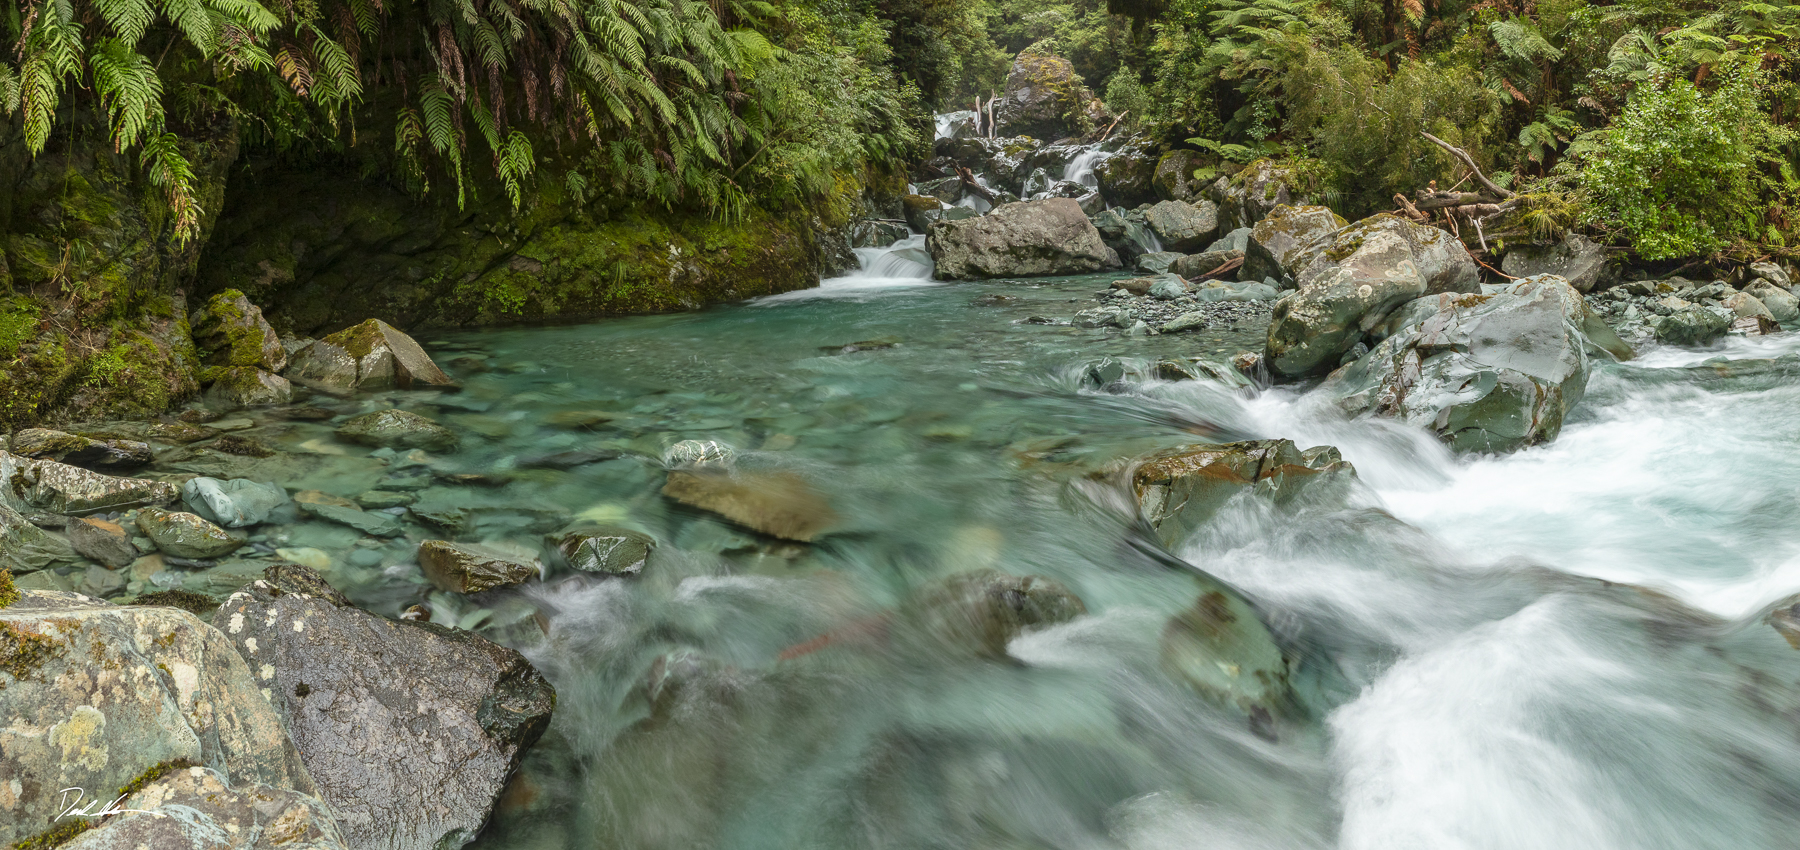 River in New Zealand forest